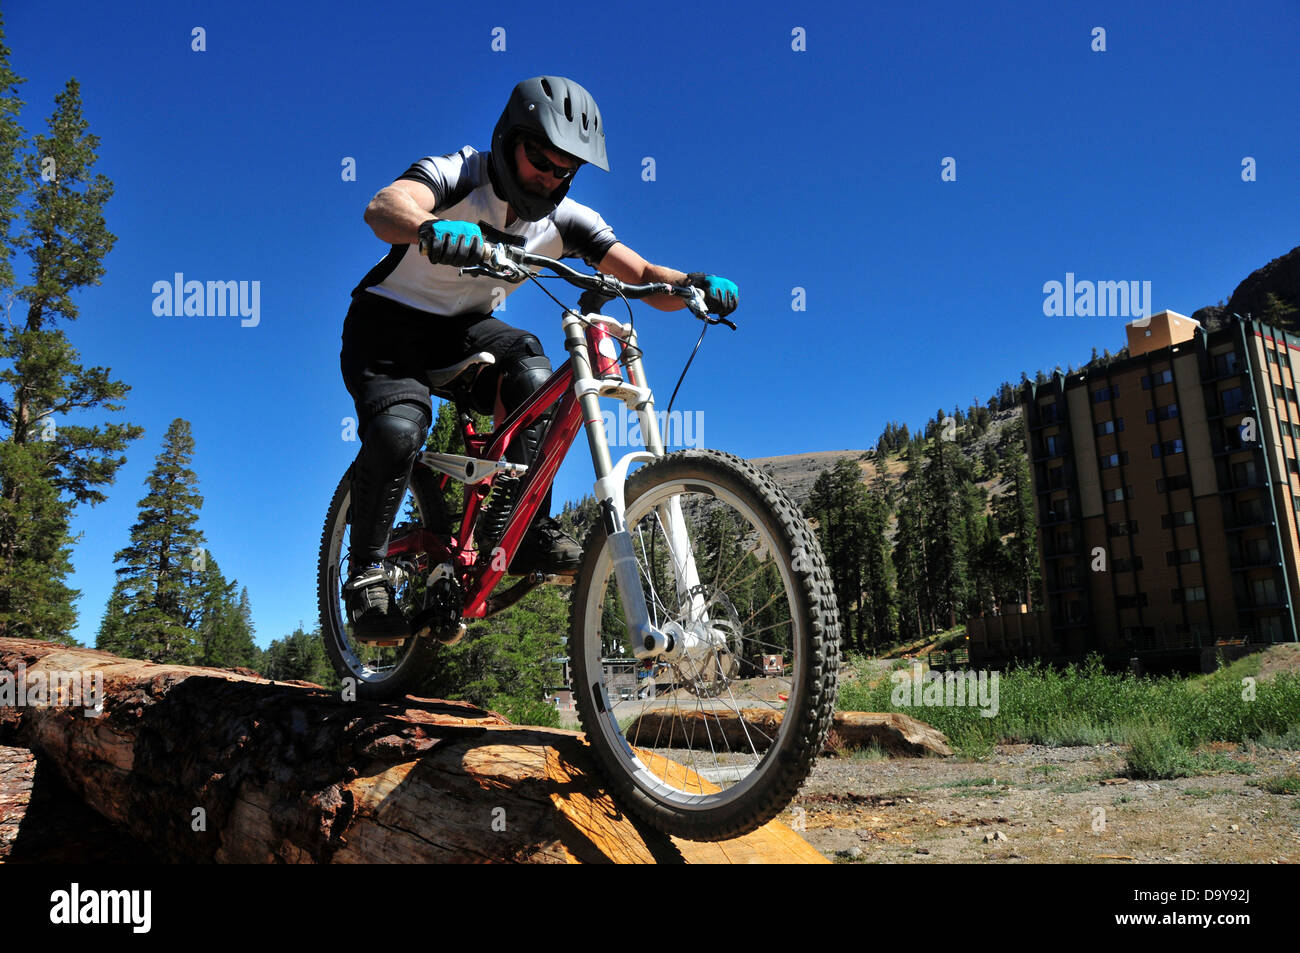 A mountain biker performs a log ride on a terrain feature at Kirkwood Mountain Resort, CA. Stock Photo